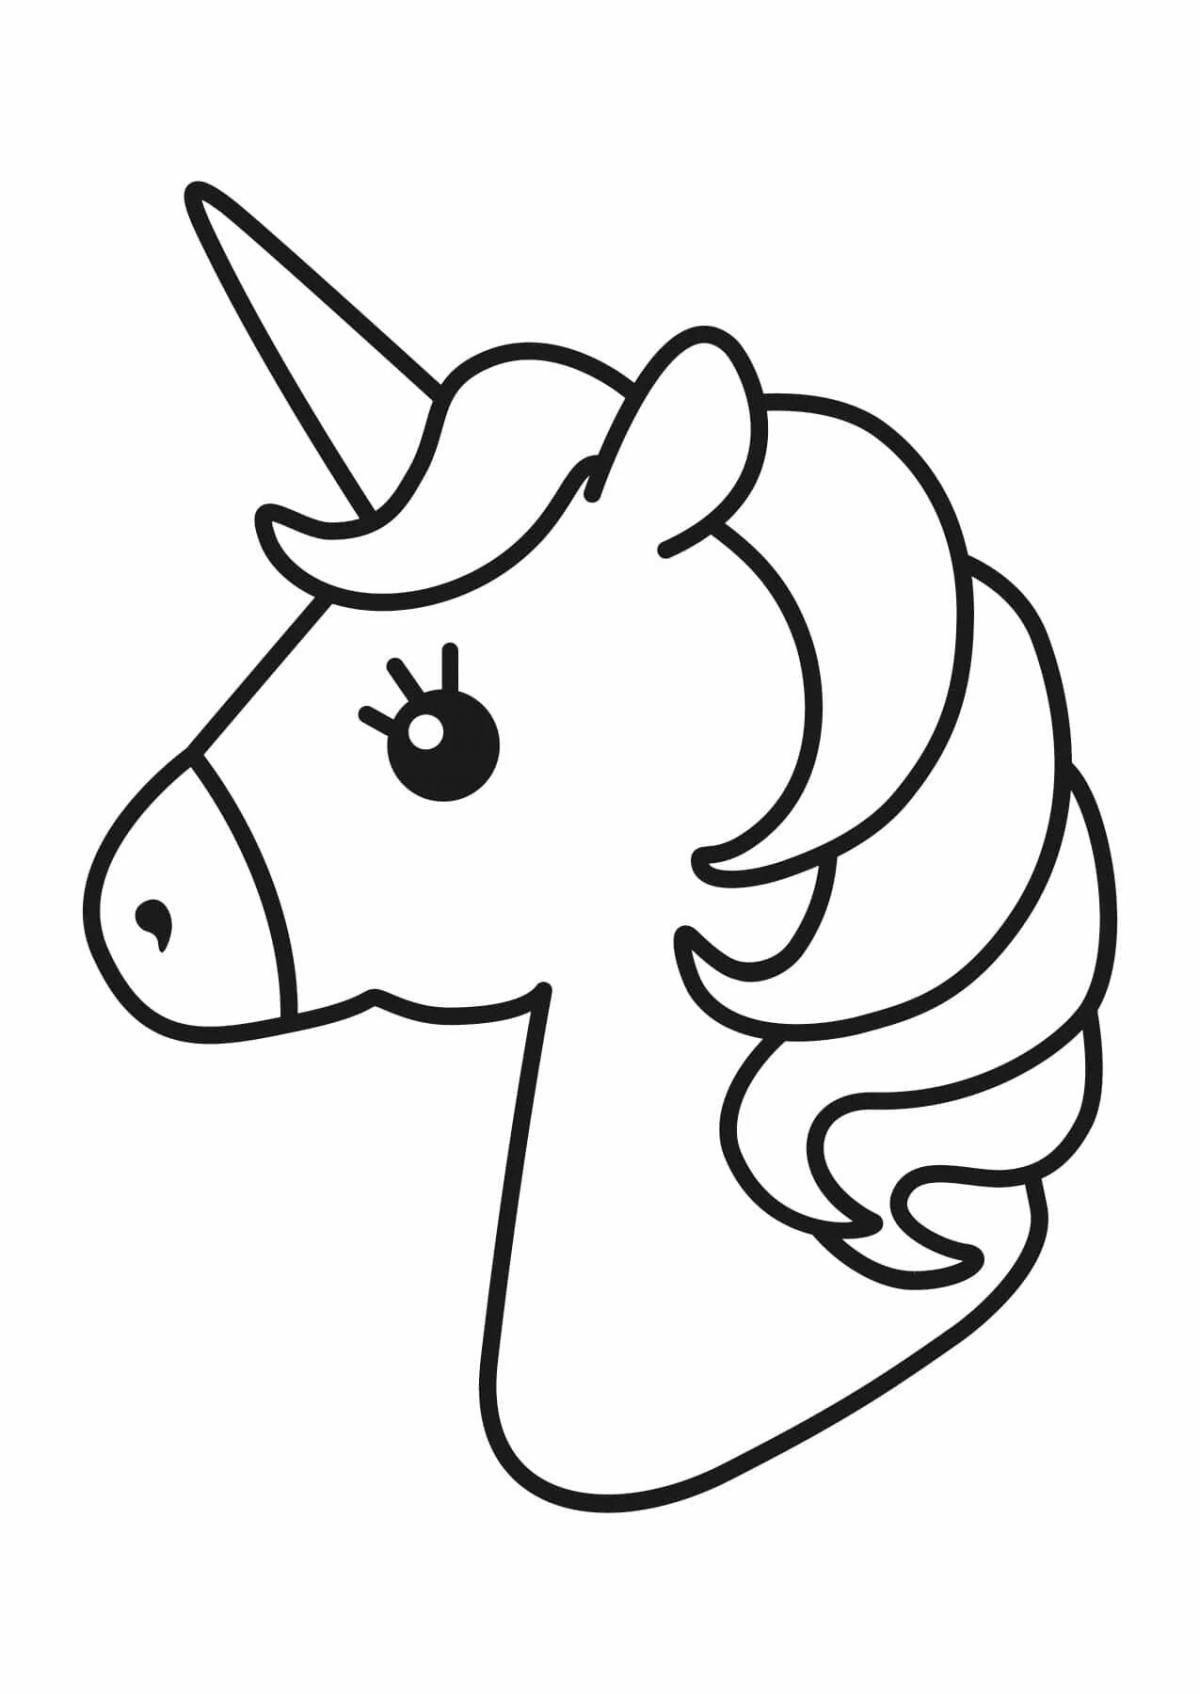 Charming unicorn lungs coloring book